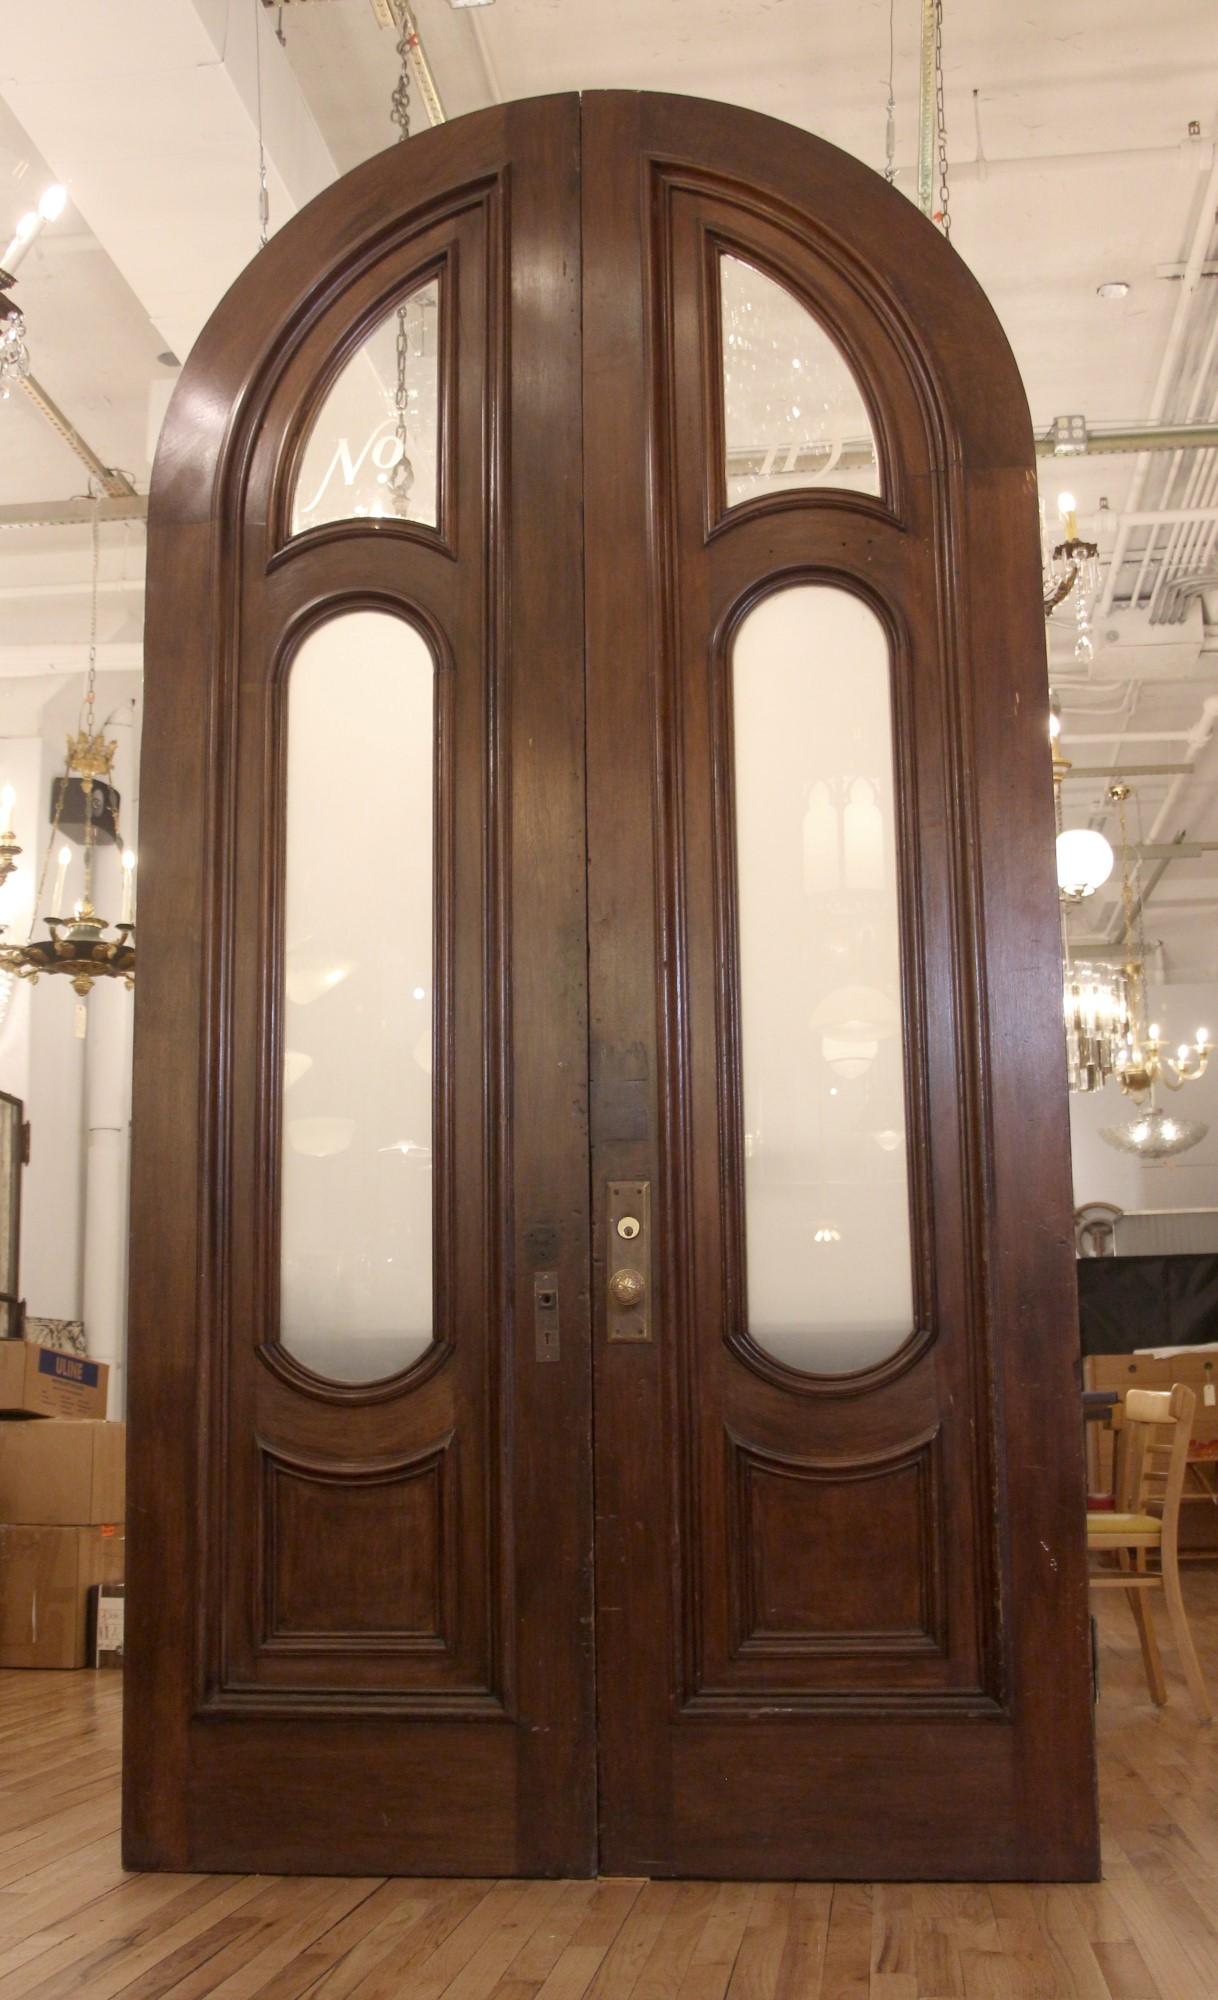 Set of large 1880s antique exterior brownstone doors with two oval frosted glass panes in the middle and two smaller clear glass arched panes on top. The top arched glass panes have No. 113 on them. These walnut doors are original to a NYC